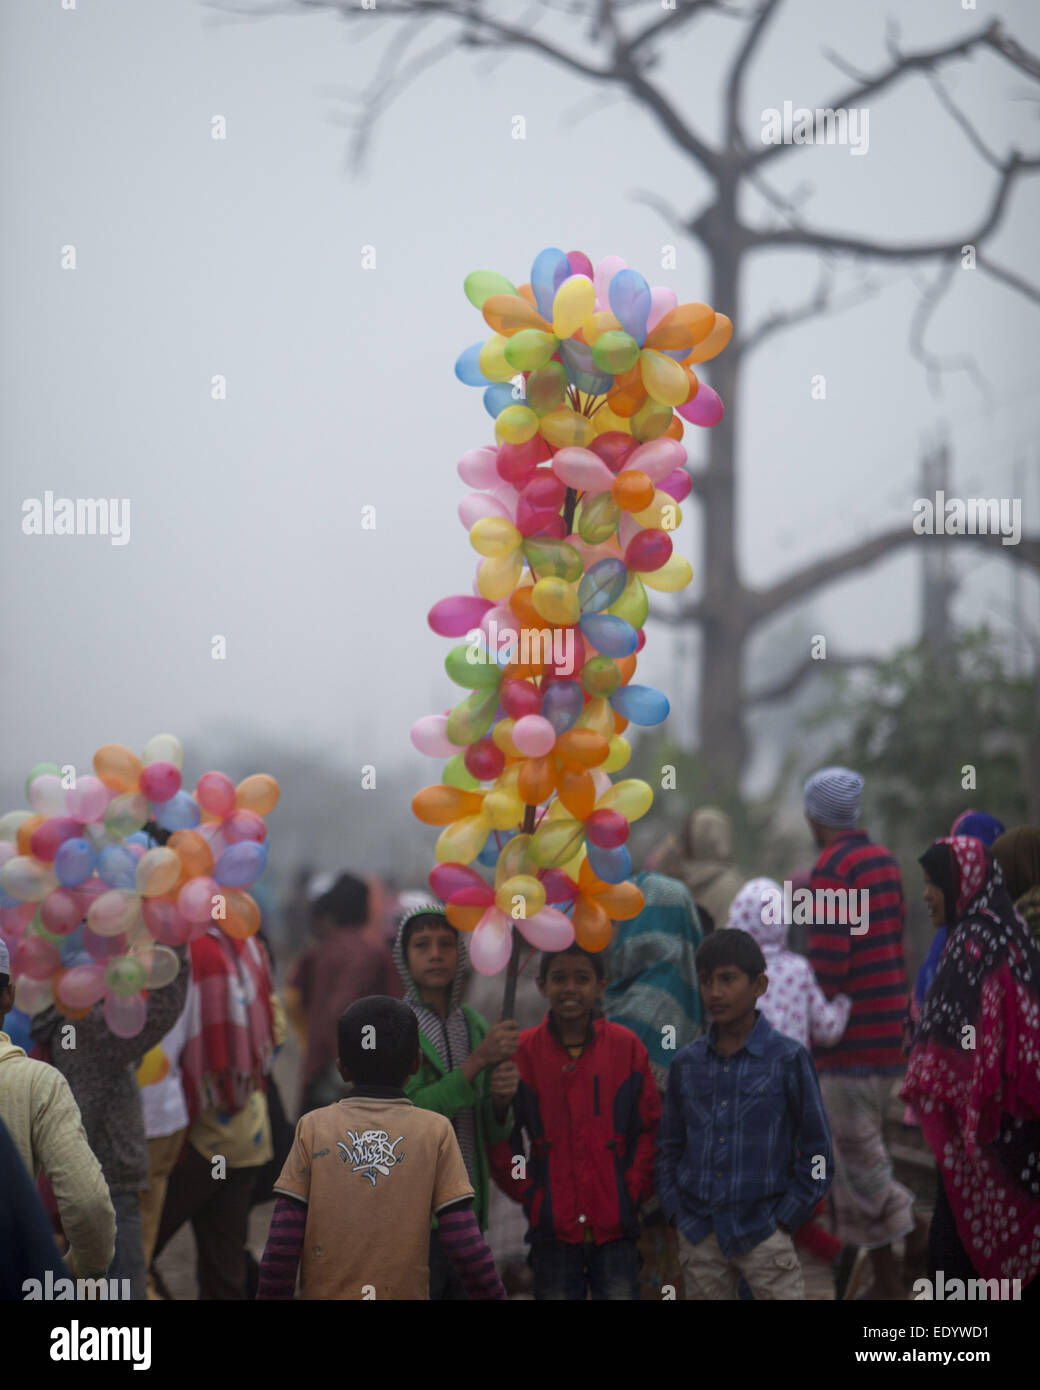 Dhaka, Bangladesh. 11th Jan, 2015. Bangladeshi boy carries balloons for sale as he watches Muslim devotees walk to attend the final prayer of the three-day Islamic Congregation on the banks of the River Turag in Tongi, 20 kilometers (13 miles) north of the capital Dhaka. Hundreds of thousands of Muslims attended the annual three-day event that is one of the world's largest religious gatherings being held since 1960's to revive Islamic tenets. It shuns politics and calls for peace. © Zakir Hossain Chowdhury/ZUMA Wire/Alamy Live News Stock Photo